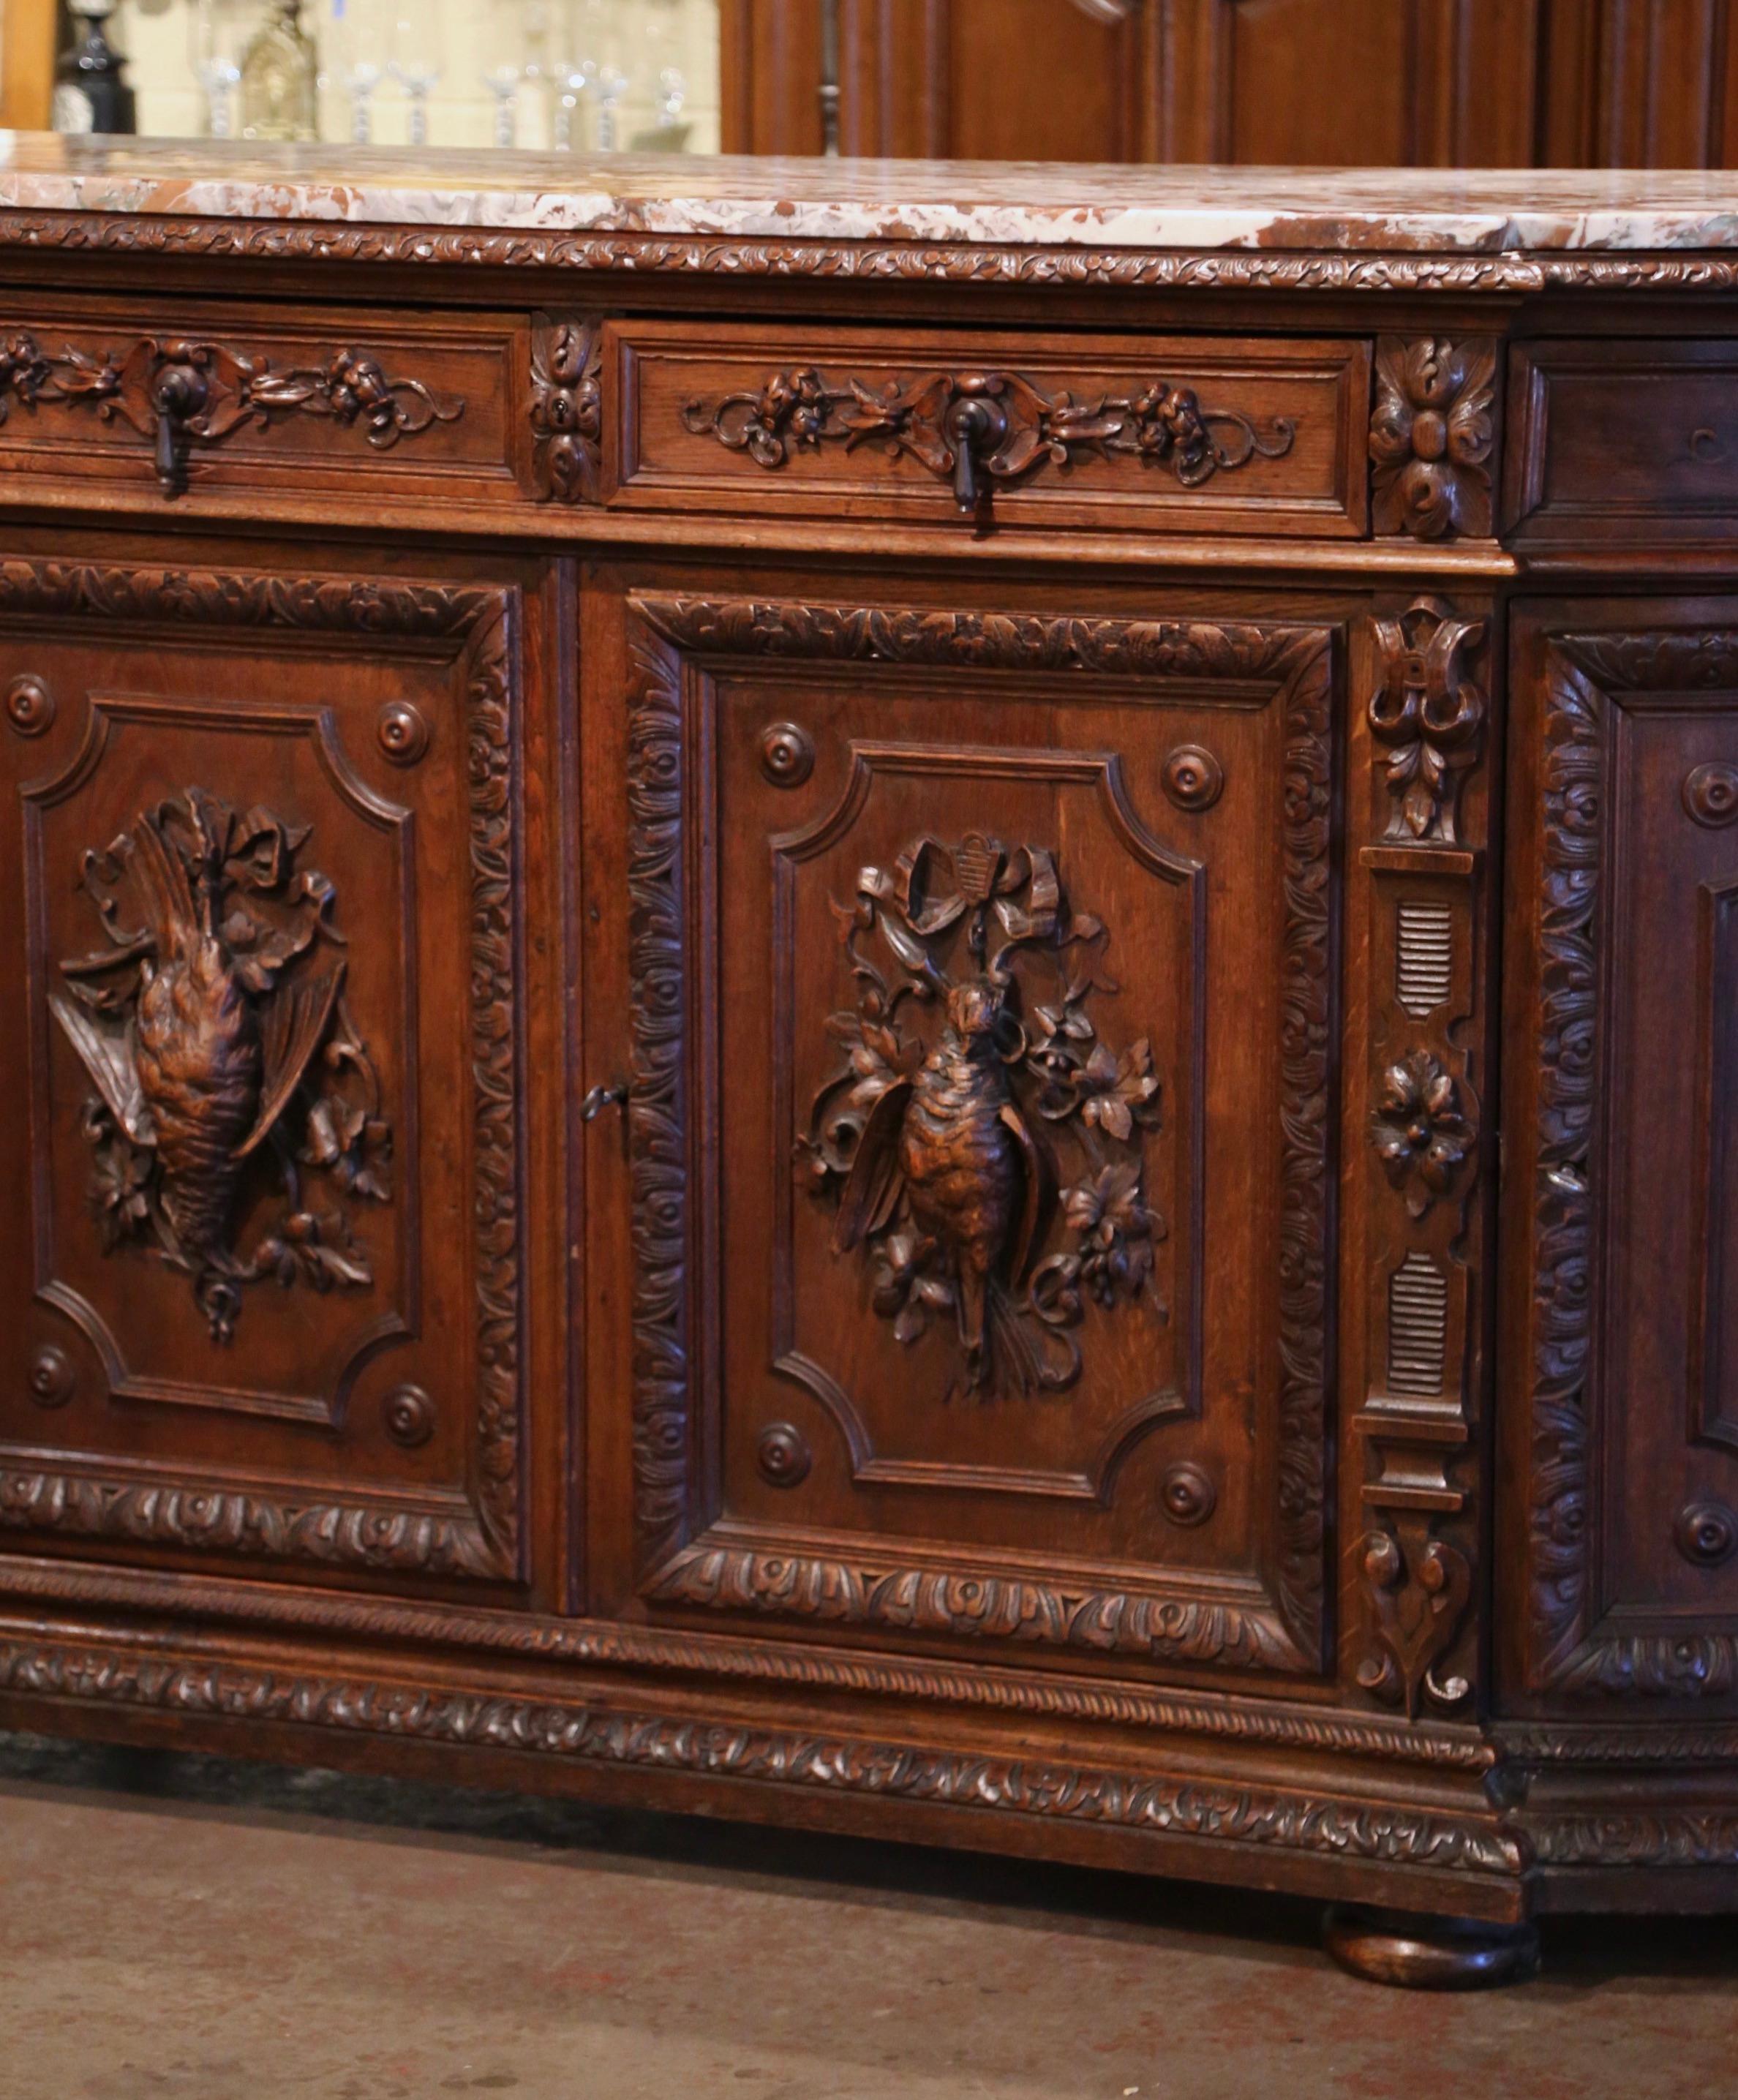 Decorate a ranch or hunting lodge with this important elegant antique four-door sideboard. Crafted in France, circa 1870, the highly detailed buffet with curved sides stands on bun feet over a wide bottom plinth. The long cabinet features four